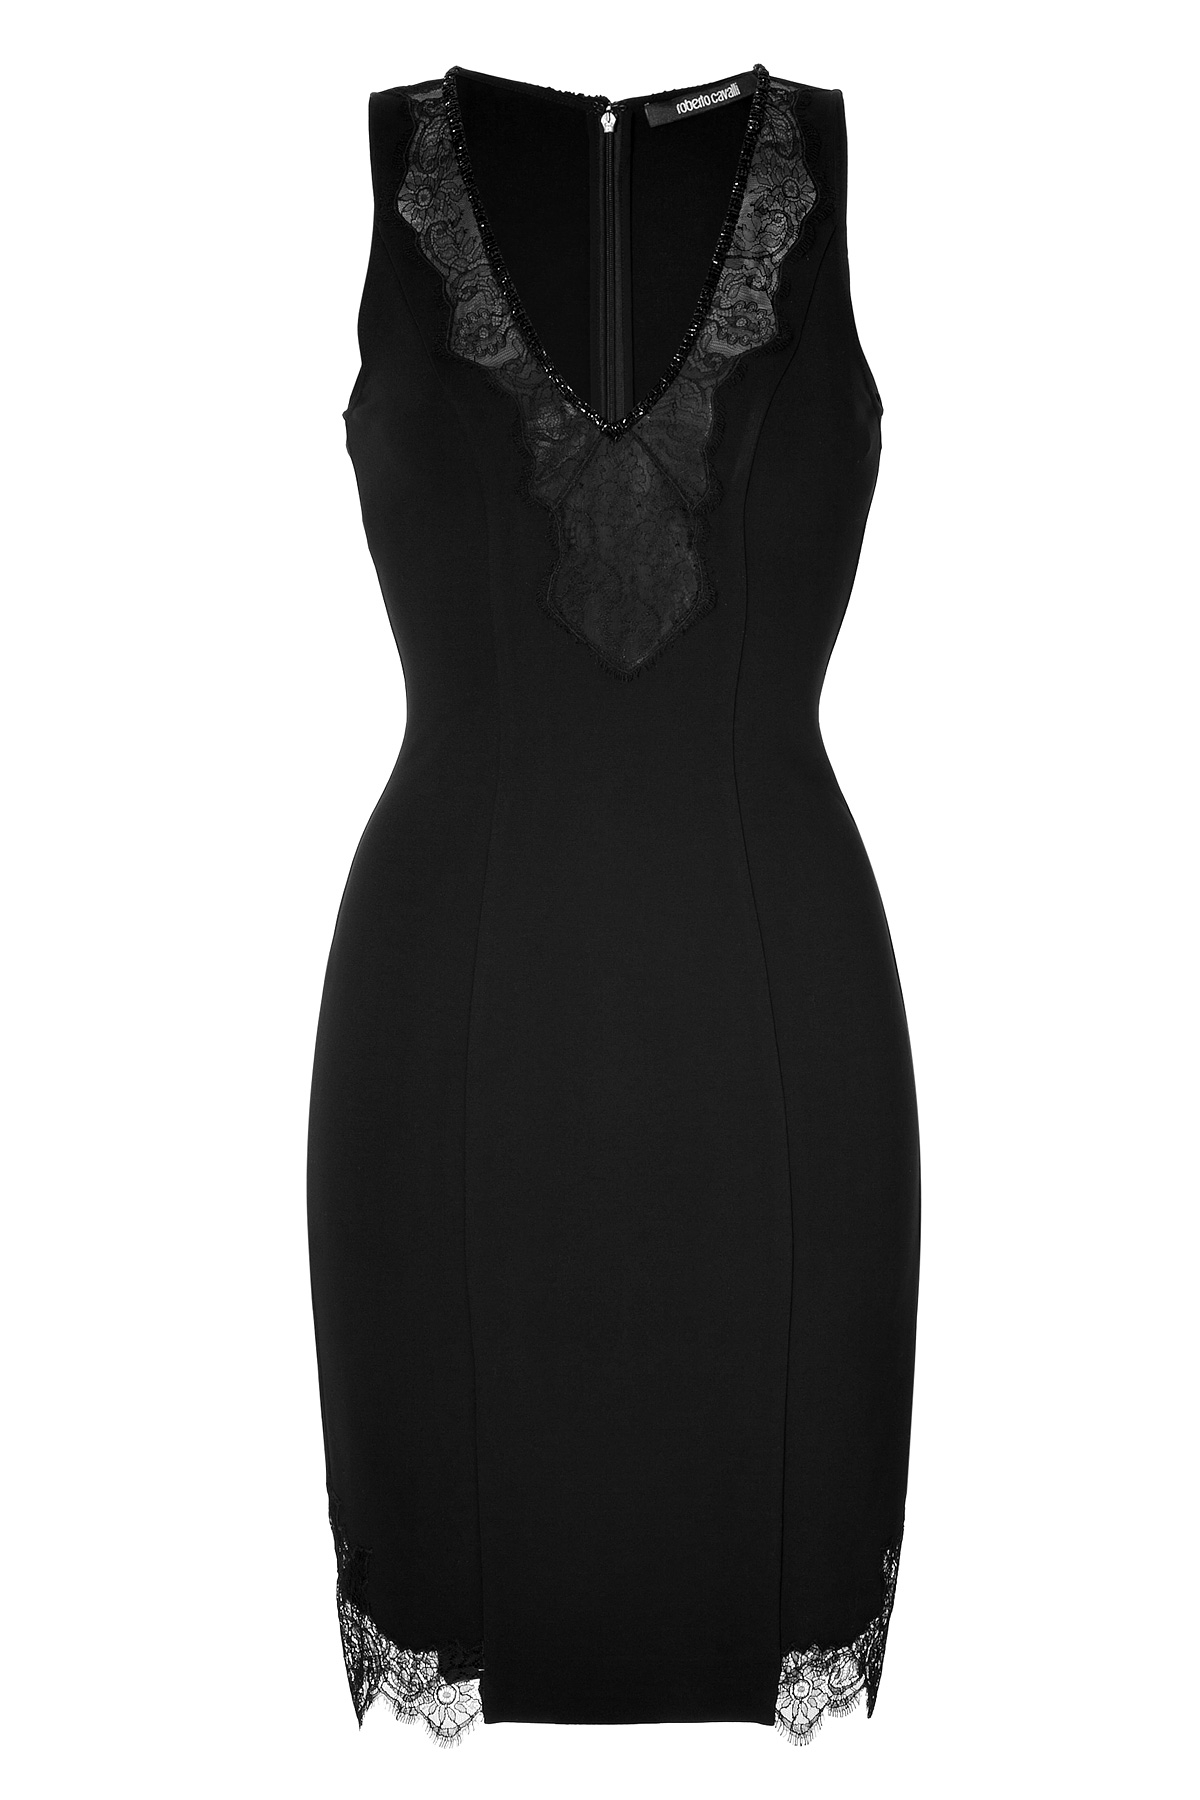 Lyst - Roberto Cavalli Lace Embroidered Dress In Black in Black